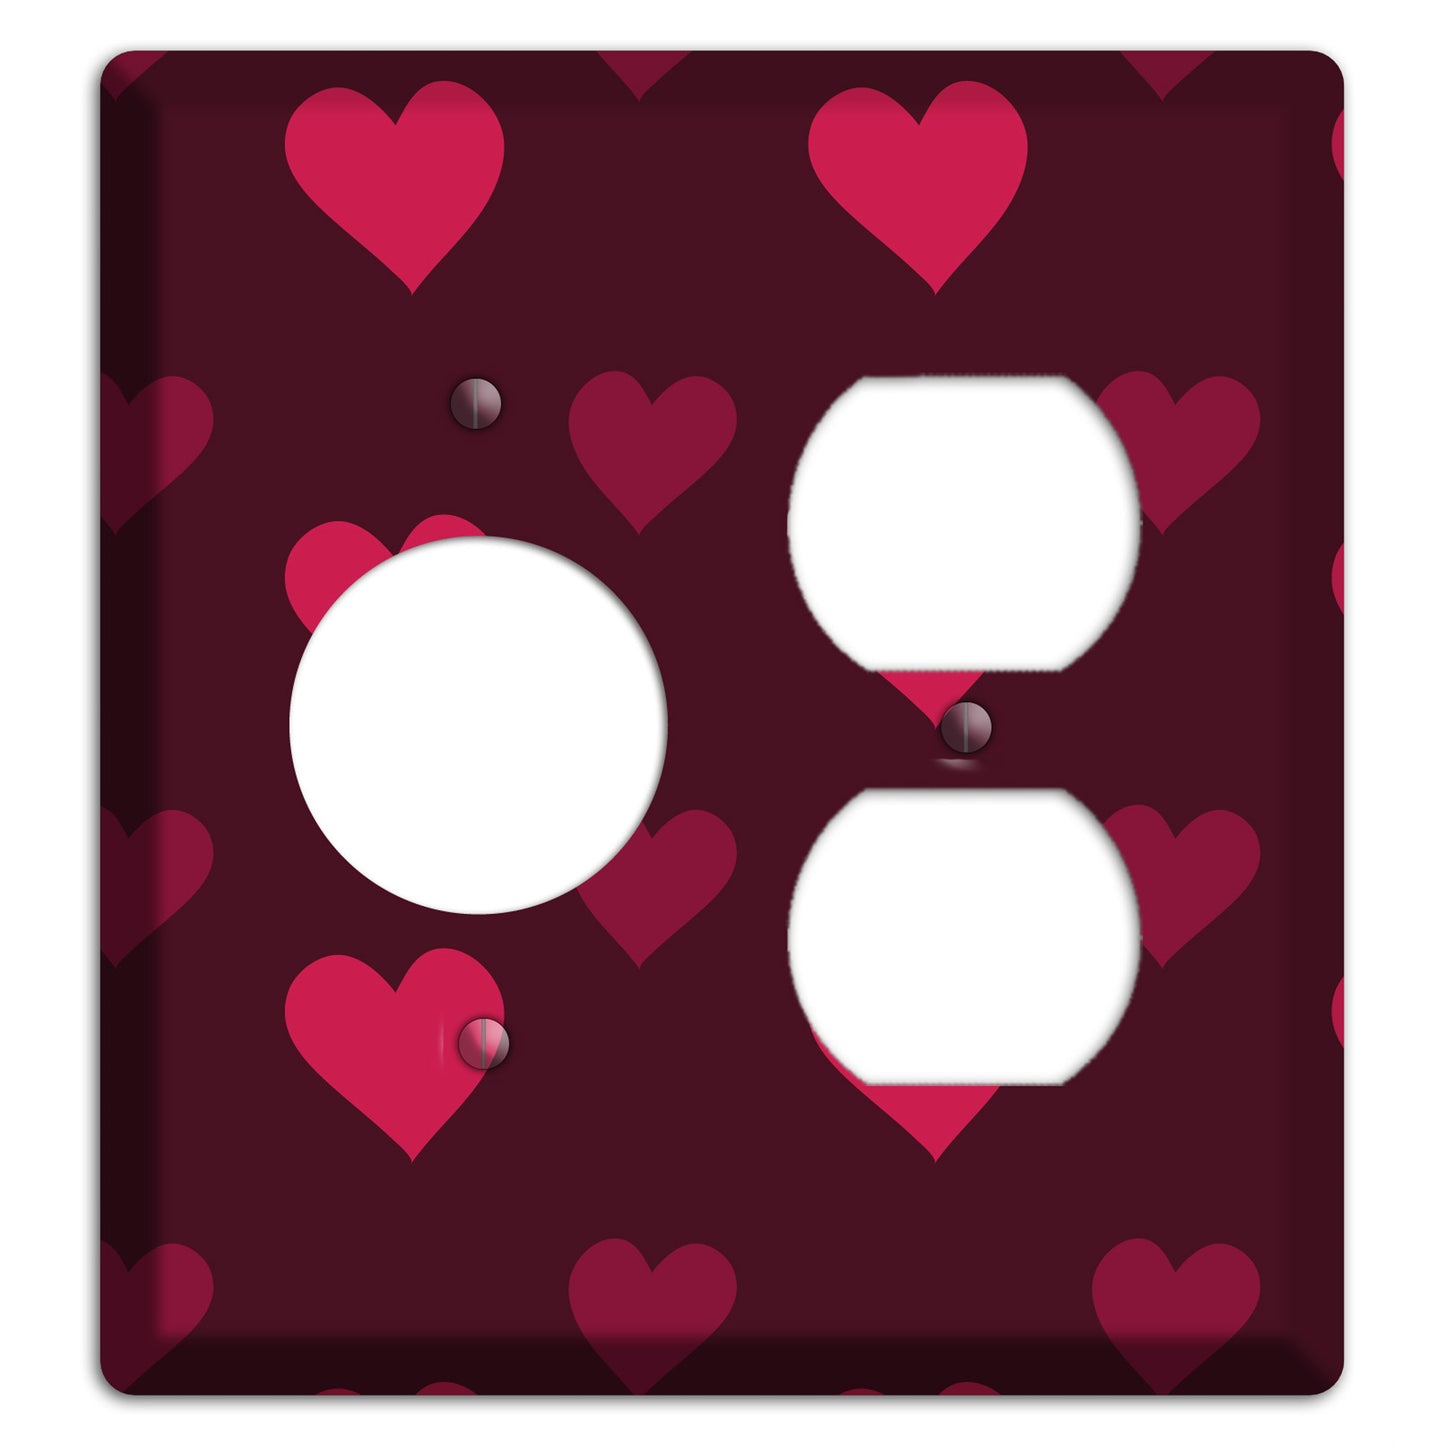 Tiled Large Hearts Receptacle / Duplex Wallplate